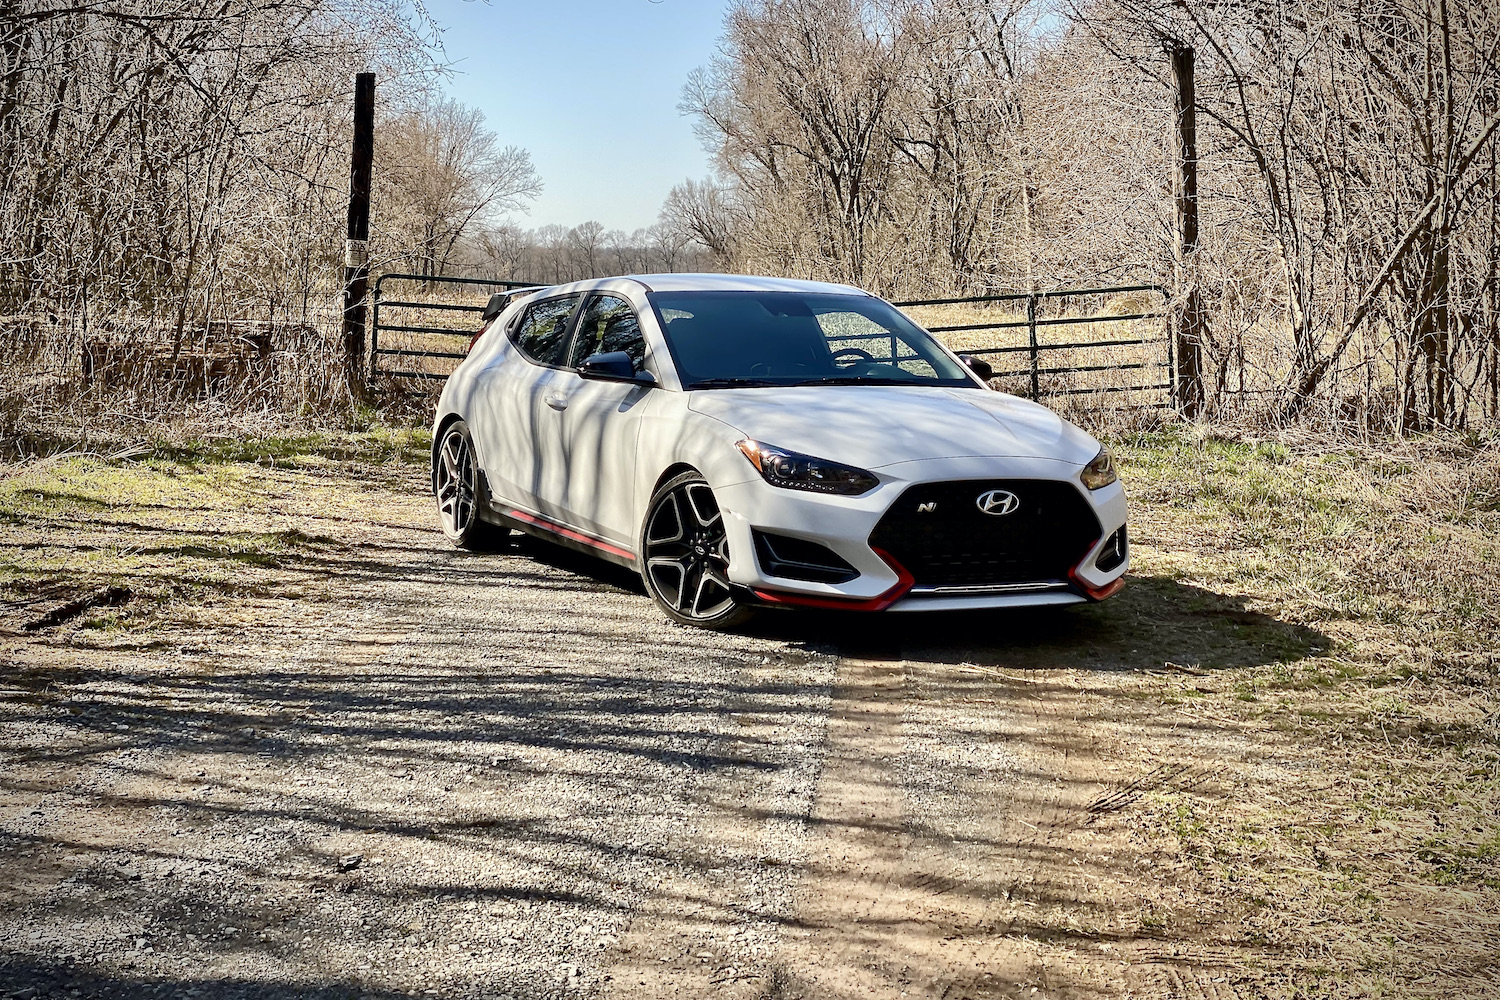 Hyundai Veloster N front end from passenger side in front of a fence.